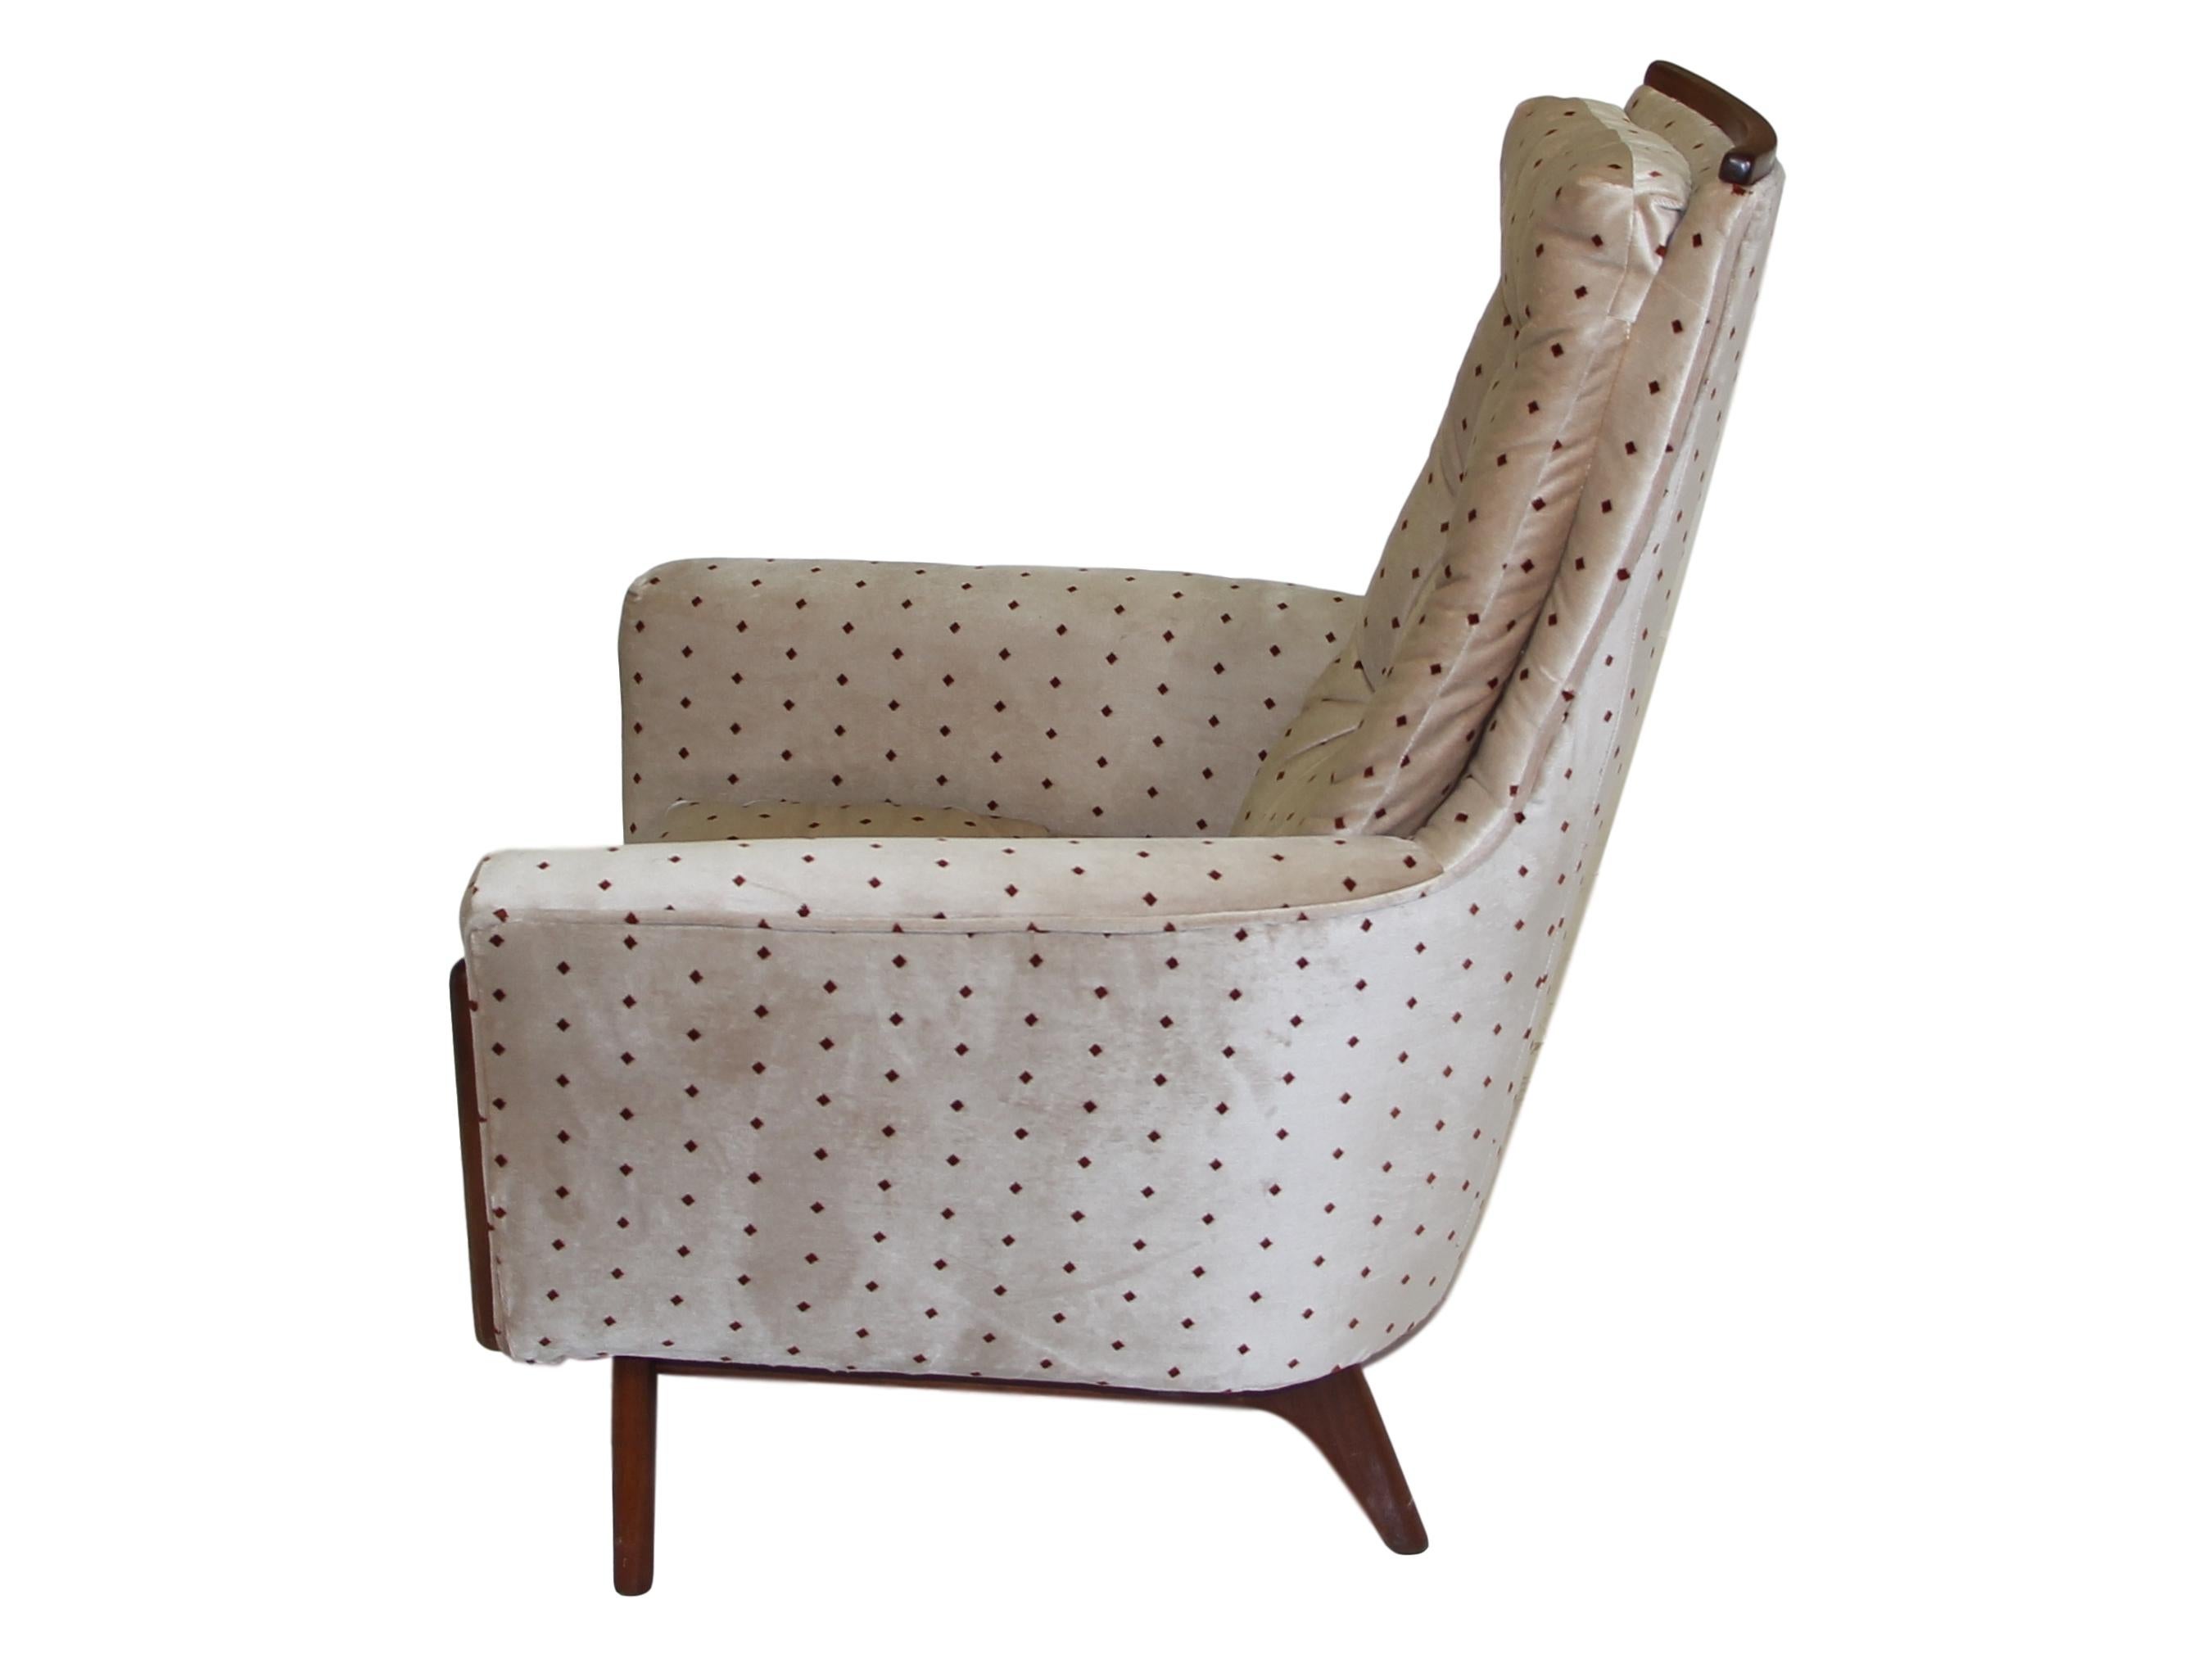 Mid-Century Modern Midcentury Pearsall Style Lounge Chair by Rowe